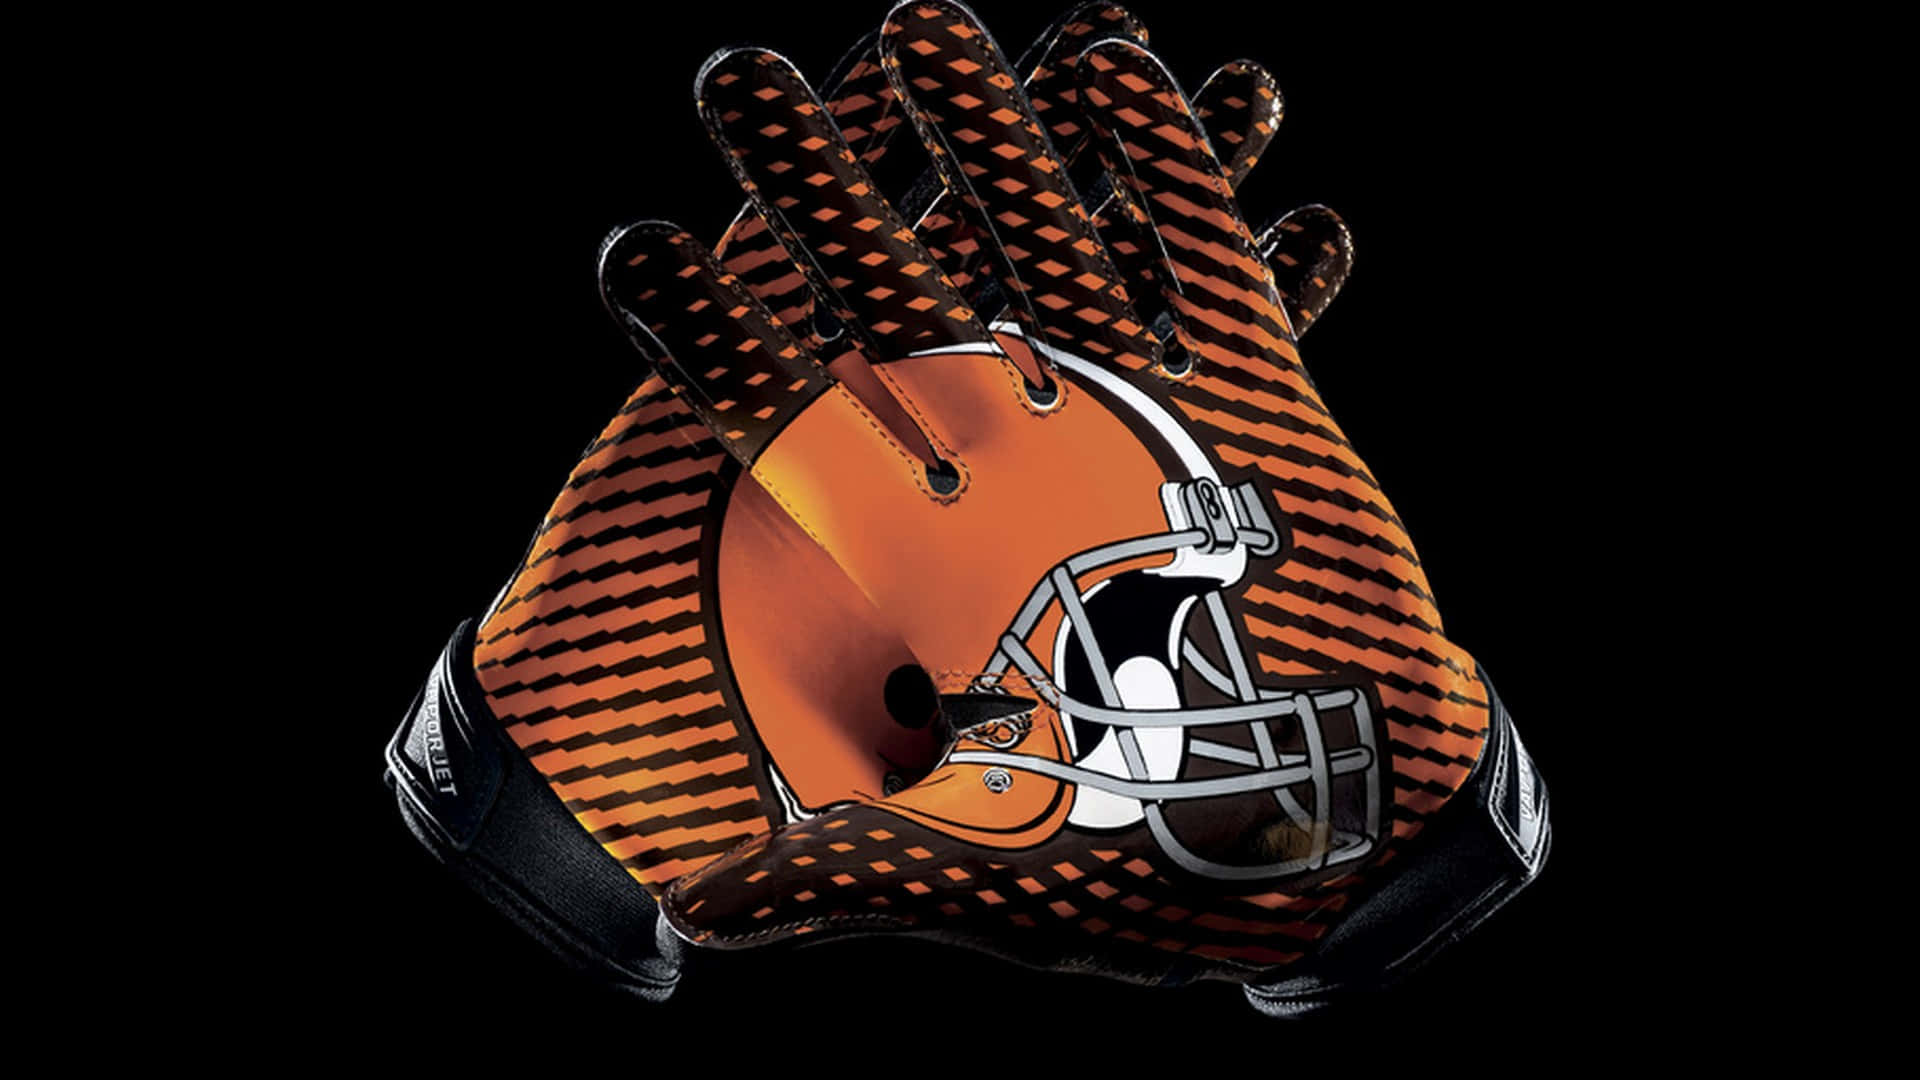 A roaring interlocking "CB" logo for the Cleveland Browns. Wallpaper